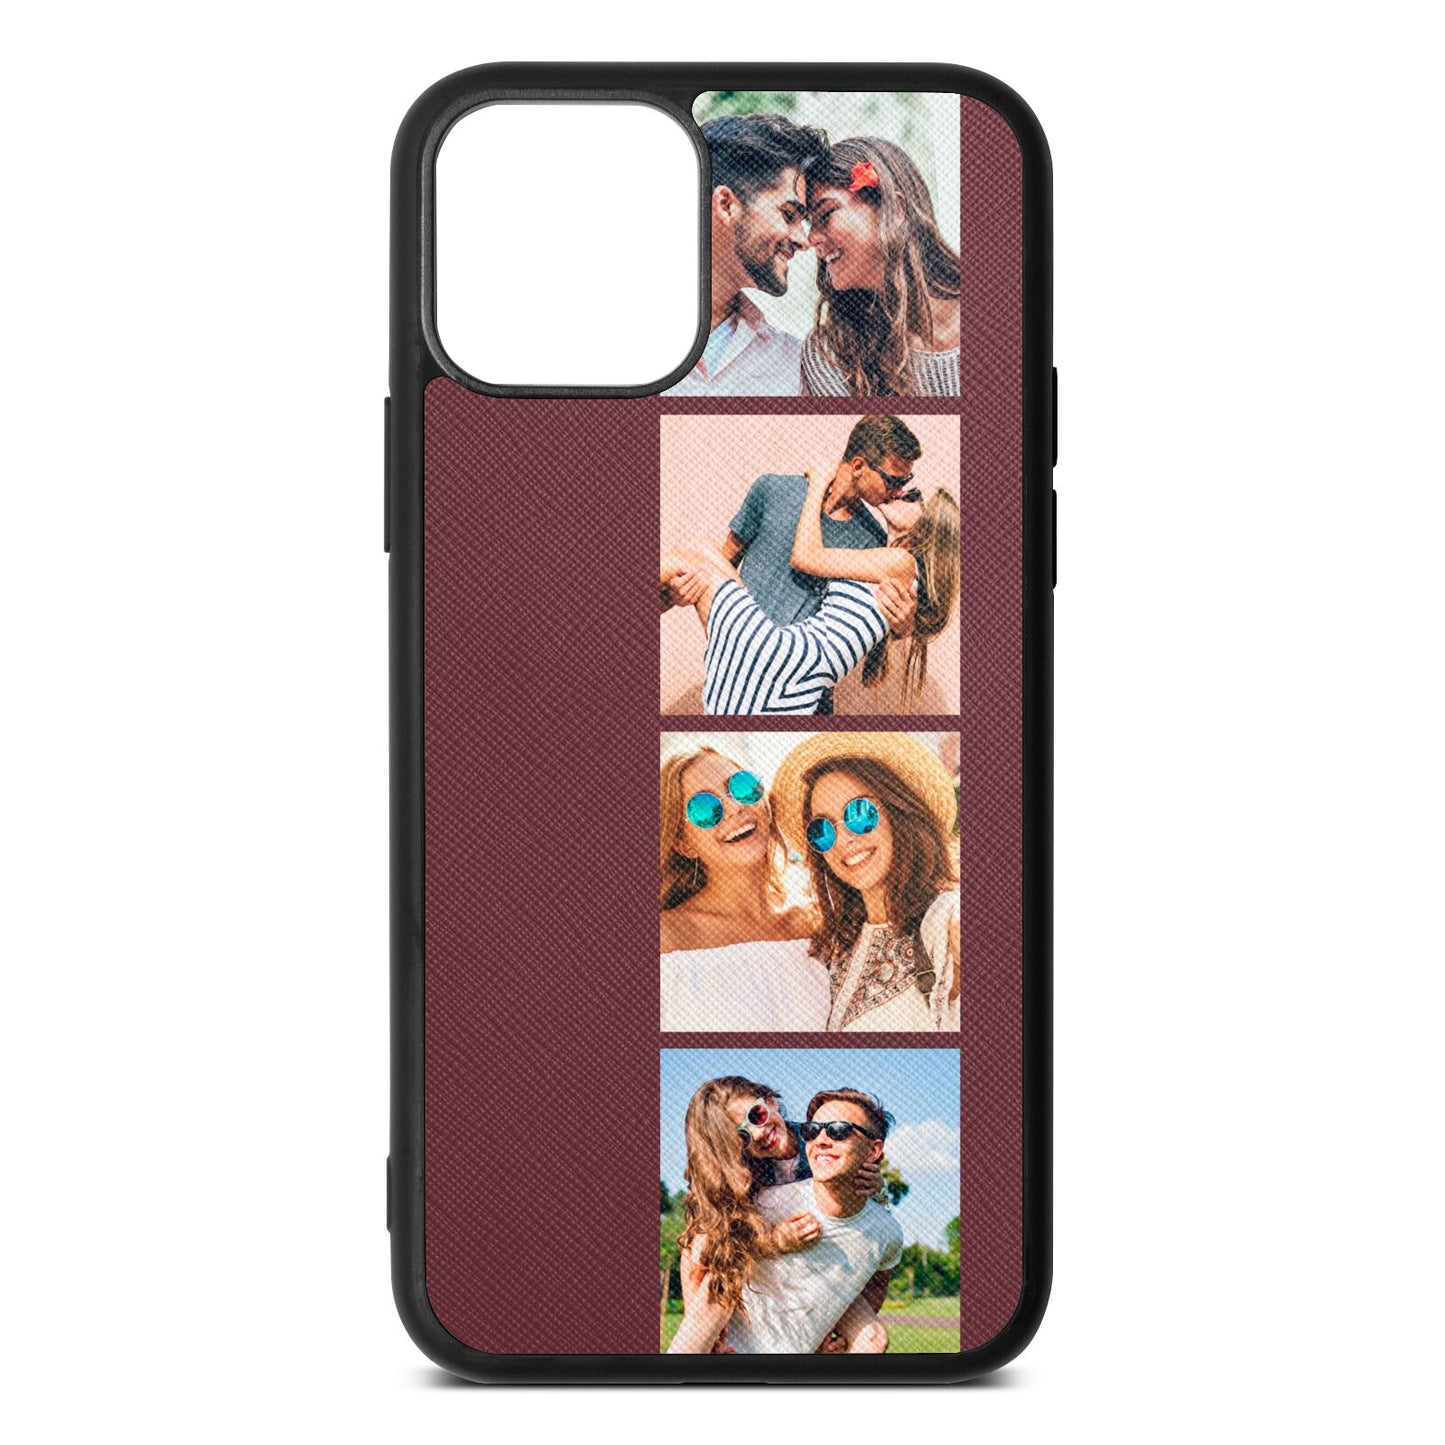 Photo Strip Montage Upload Rose Brown Saffiano Leather iPhone 11 Pro Case